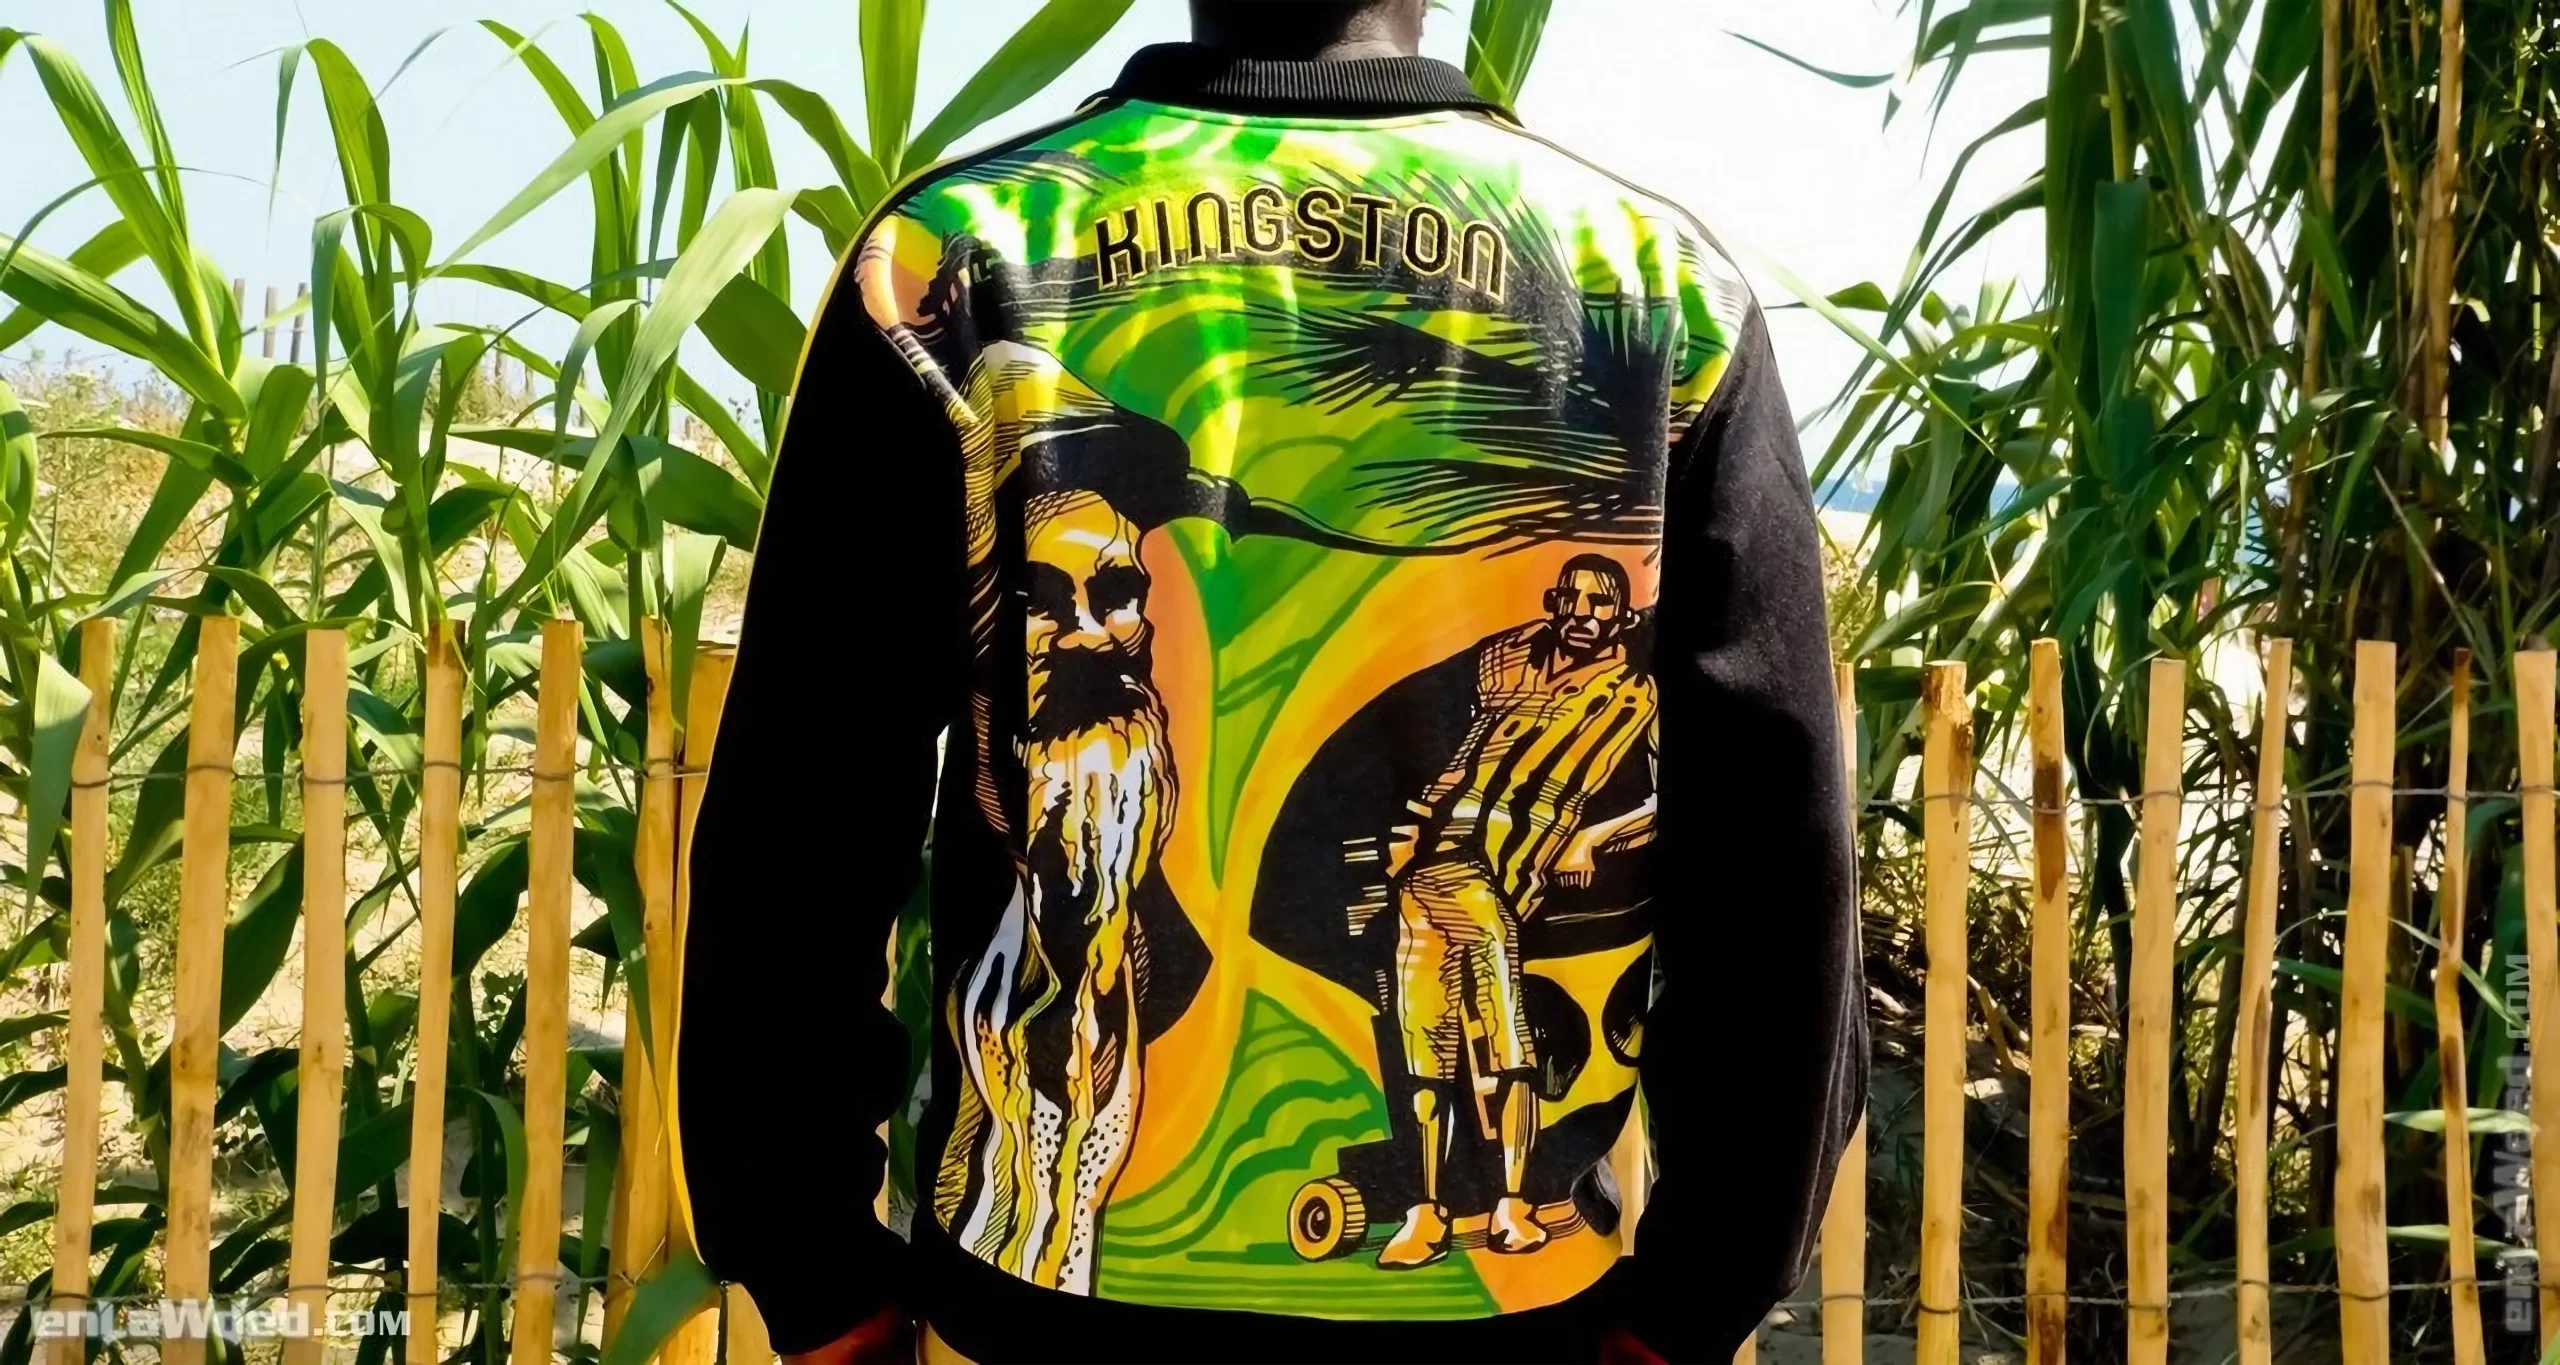 Men’s 2006 Kingston Jamaica TT by Adidas Originals: Blessed (EnLawded.com file #lmc3mn7fg6weulqauup)